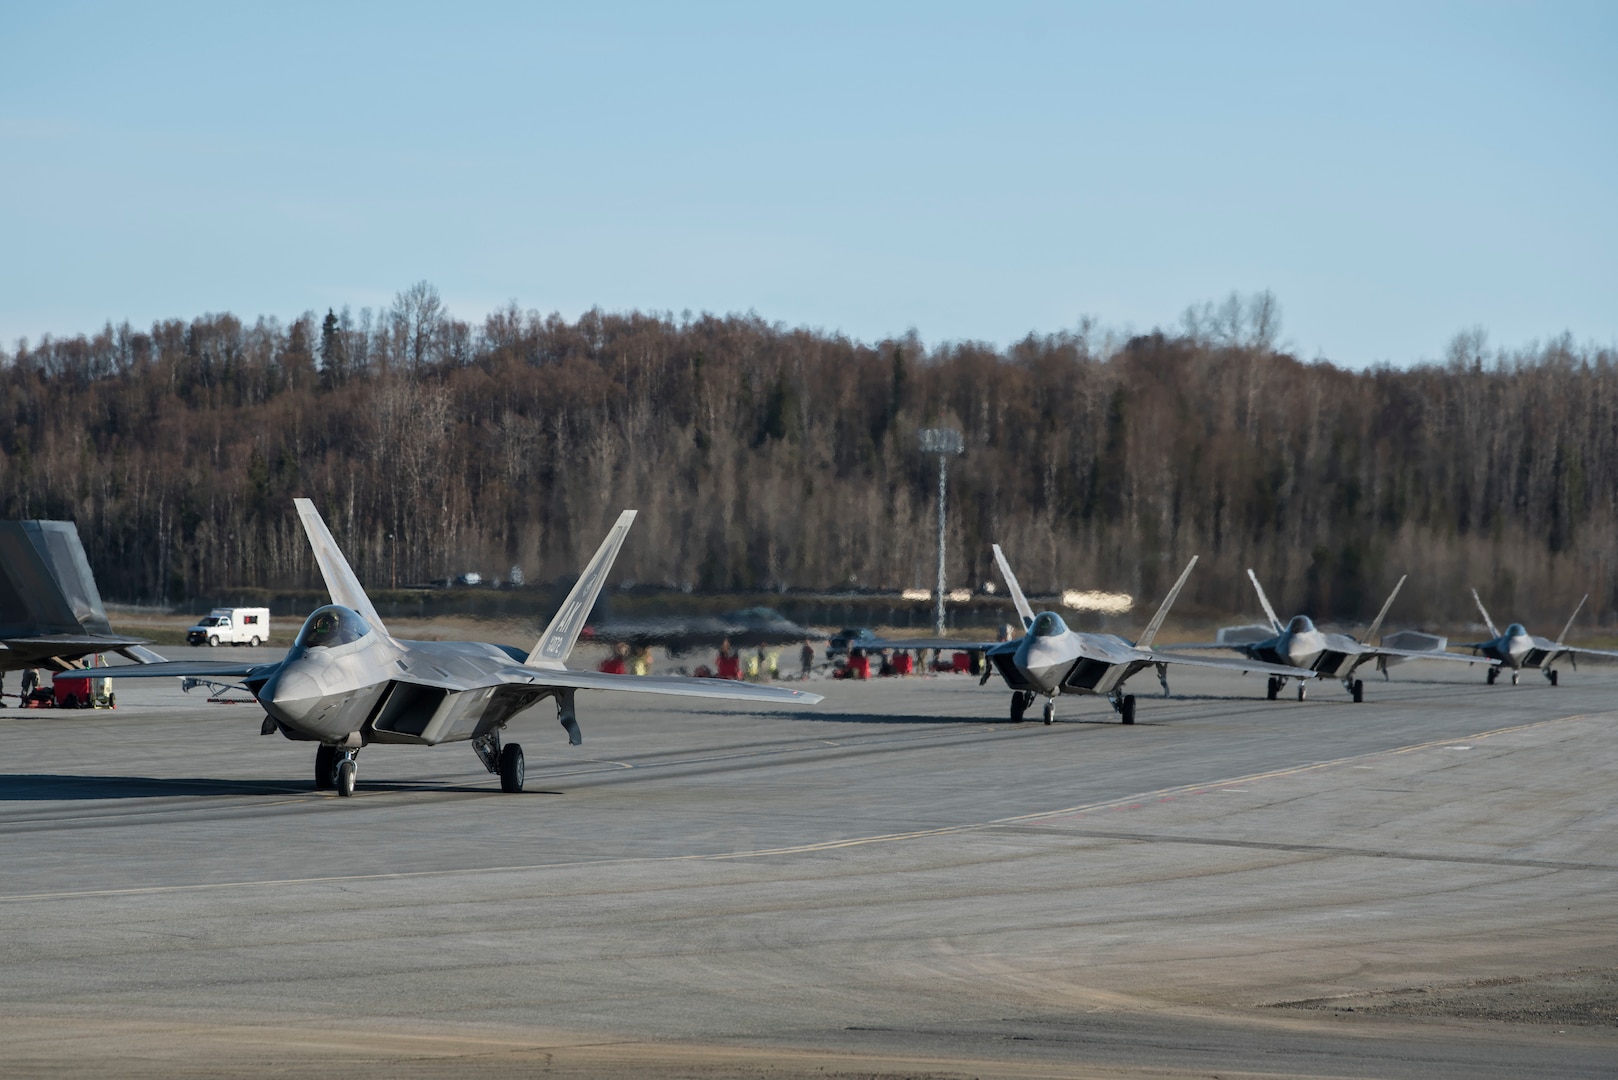 U.S. Air Force F-22 Raptors taxi onto the runway prior to an elephant walk, May 5, 2020, at Joint Base Elmendorf-Richardson, Alaska. This event displayed the ability of the 3rd Wing, 176th Wing and the 477th Fighter Group to maintain constant readiness throughout COVID-19 by Total Force Integration between active-duty, Guard and Reserve units to continue defending the U.S. homeland and ensuring a free and open Indo-Pacific.